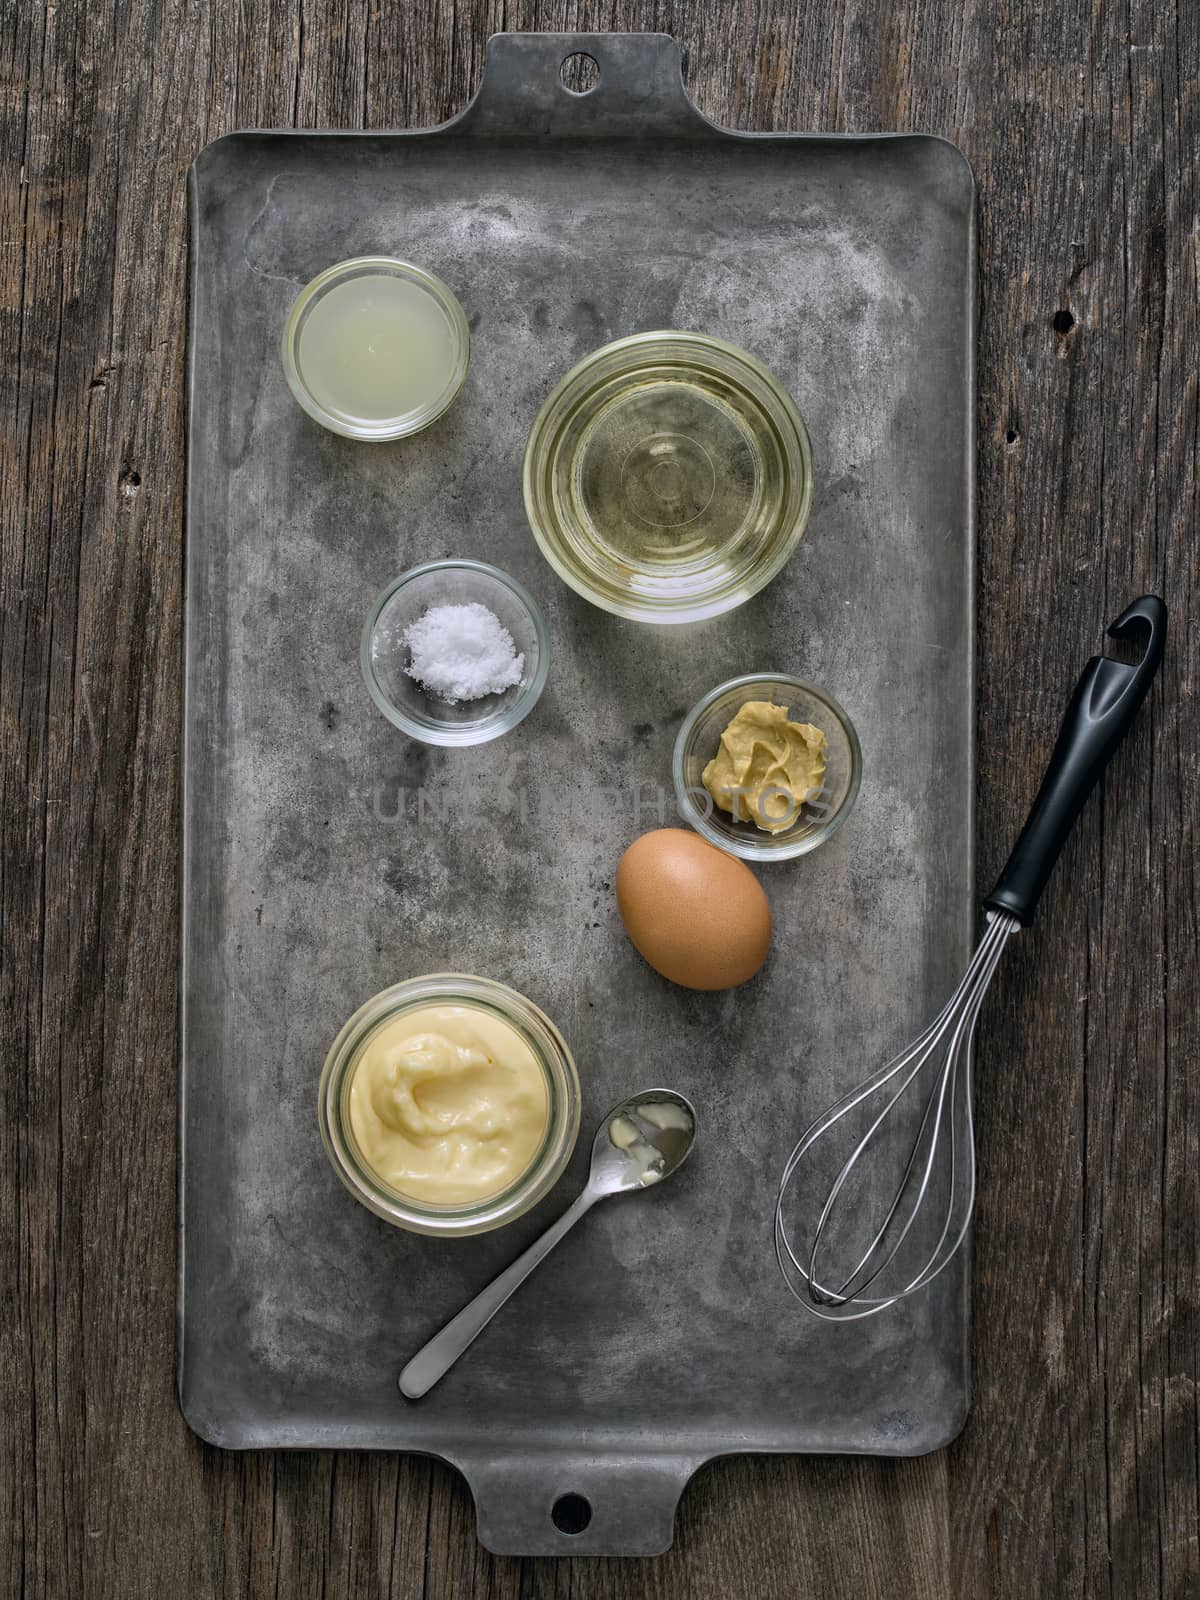 rustic homemade mayonnaise and ingredient by zkruger